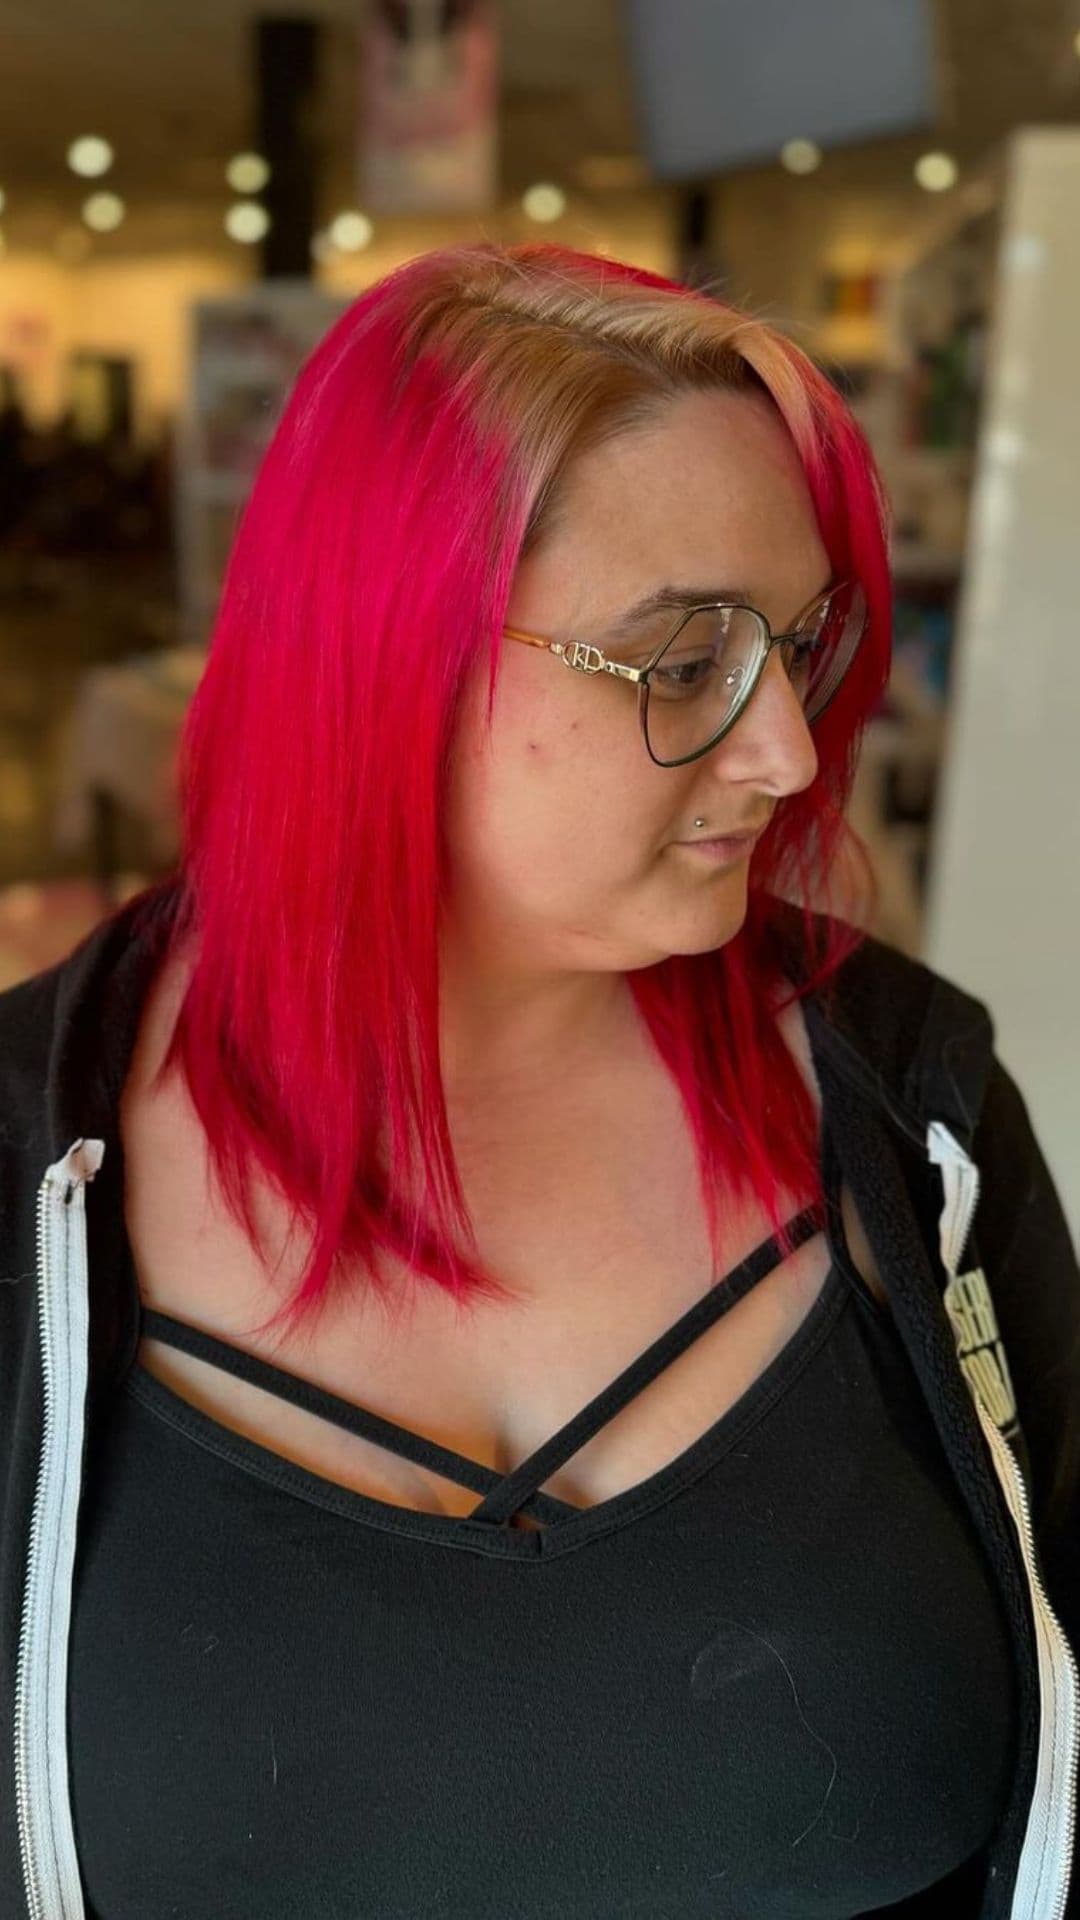 A woman modelling a red blowout hairstyle.